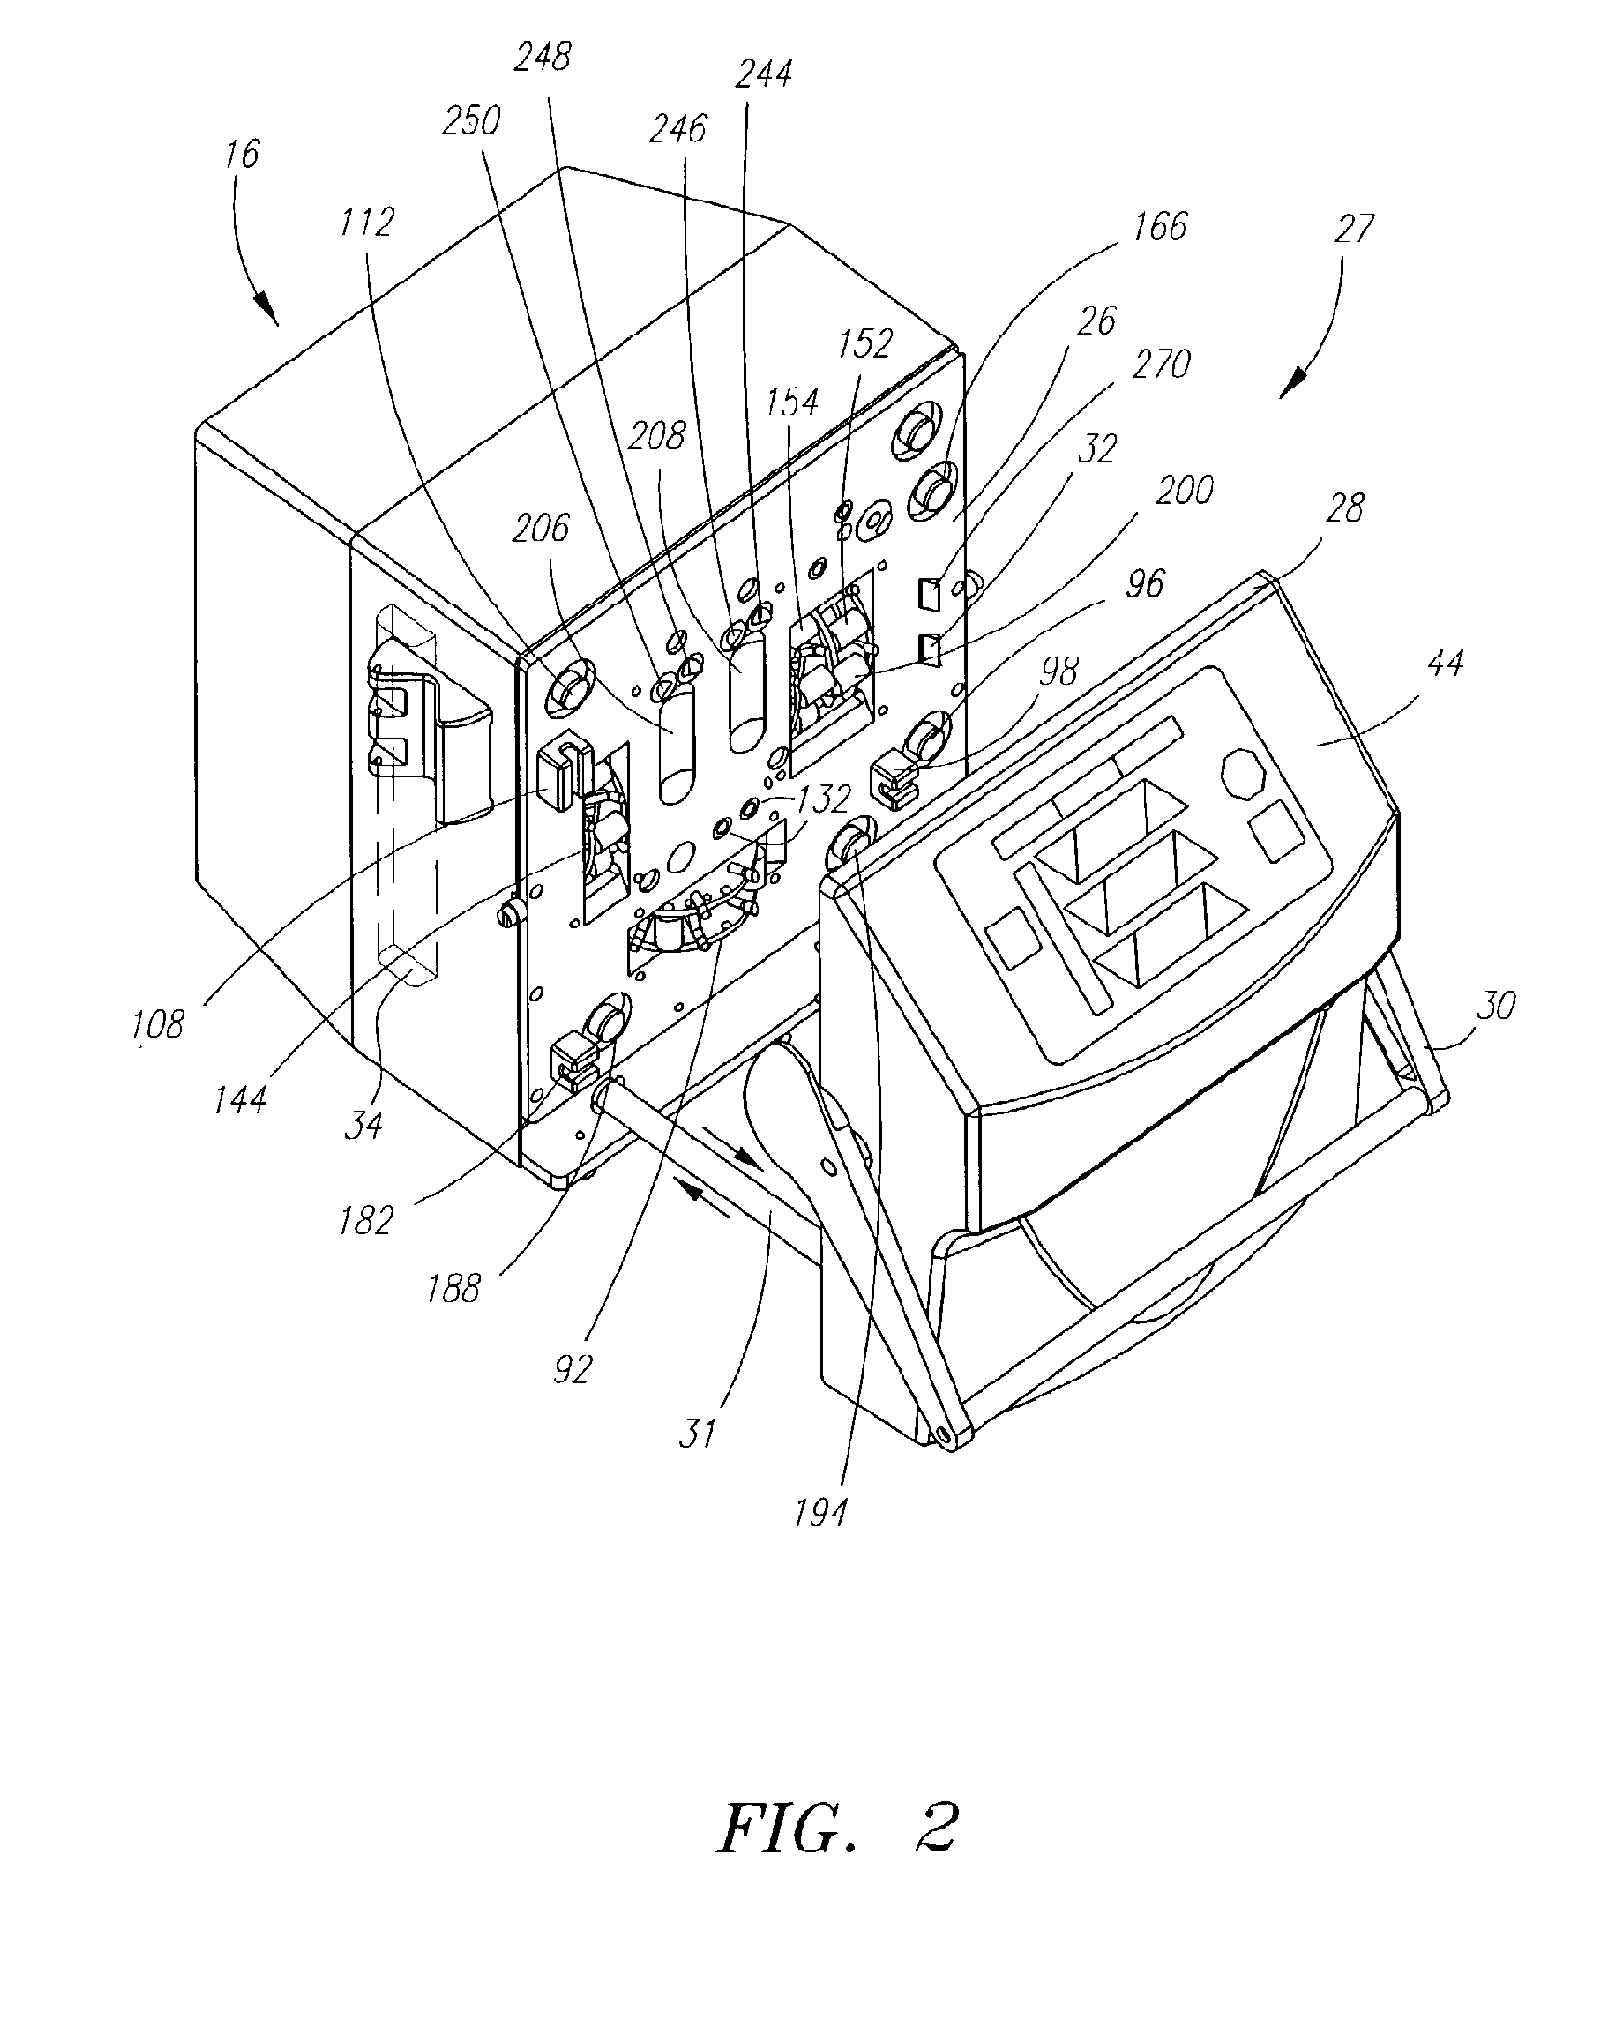 Systems and methods for performing blood processing and/or fluid exchange procedures